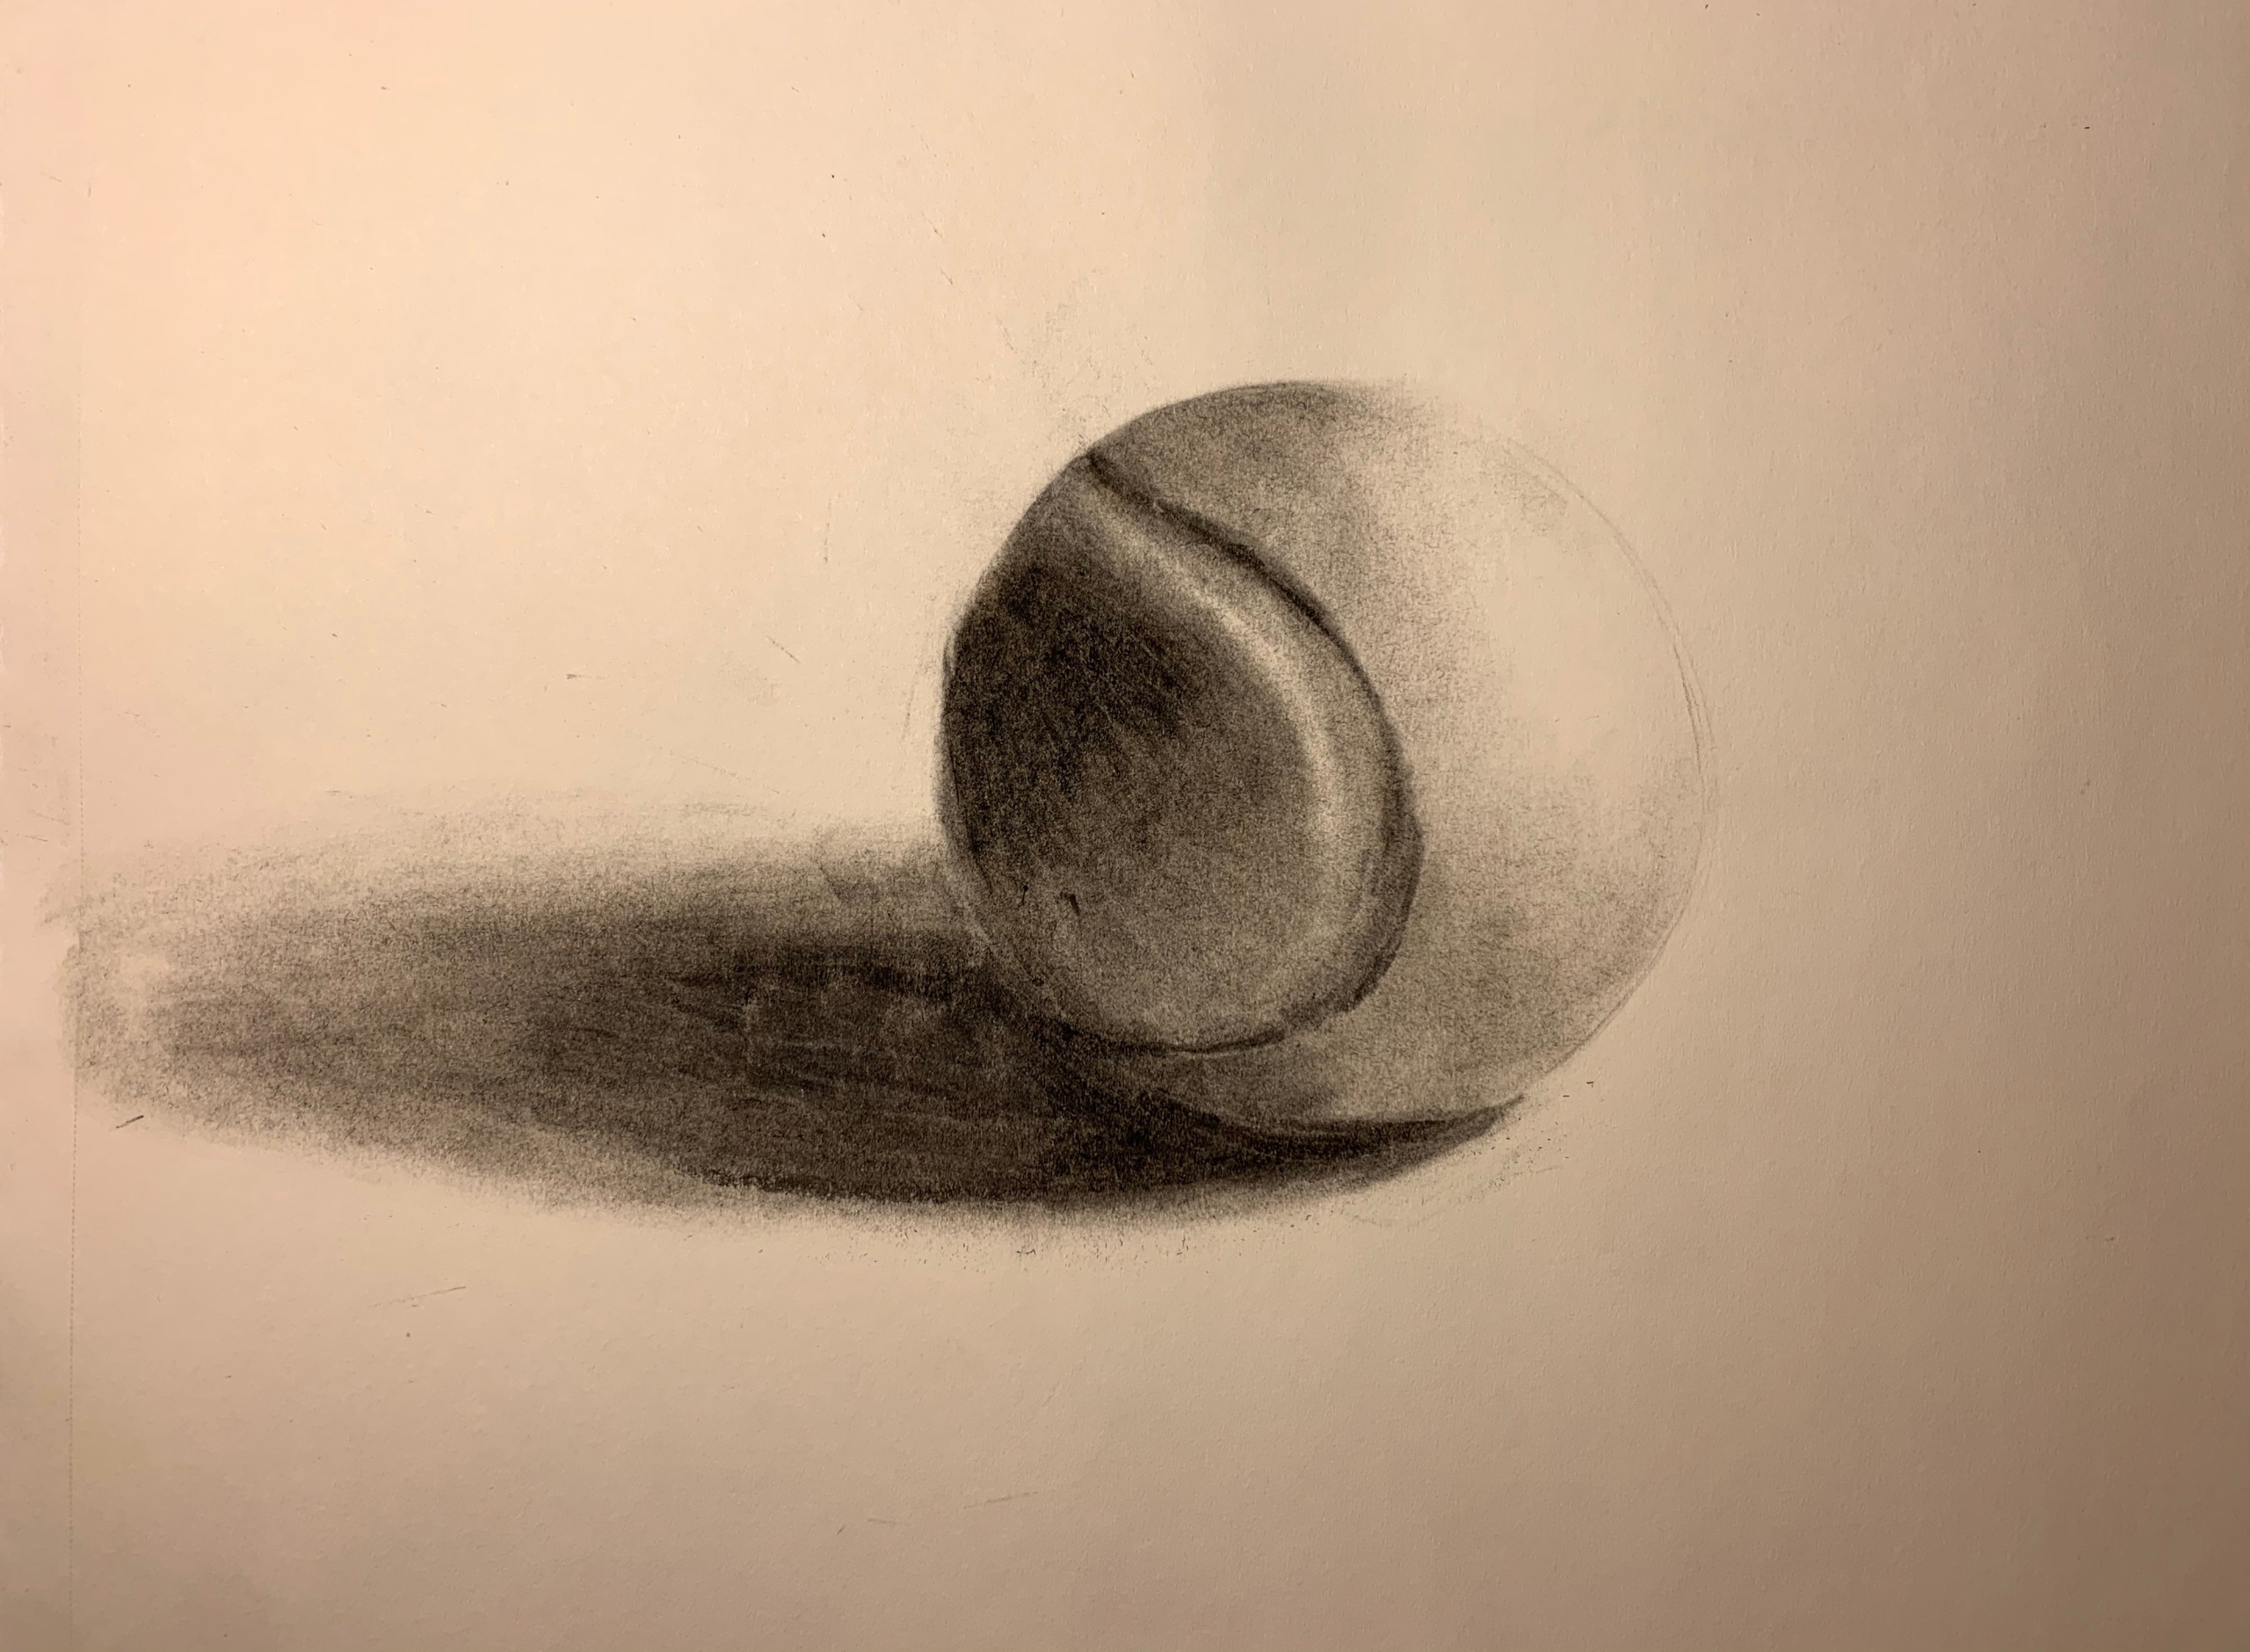 A Drawing a Day for a Year: April 29, 2011 - Harry's Ball